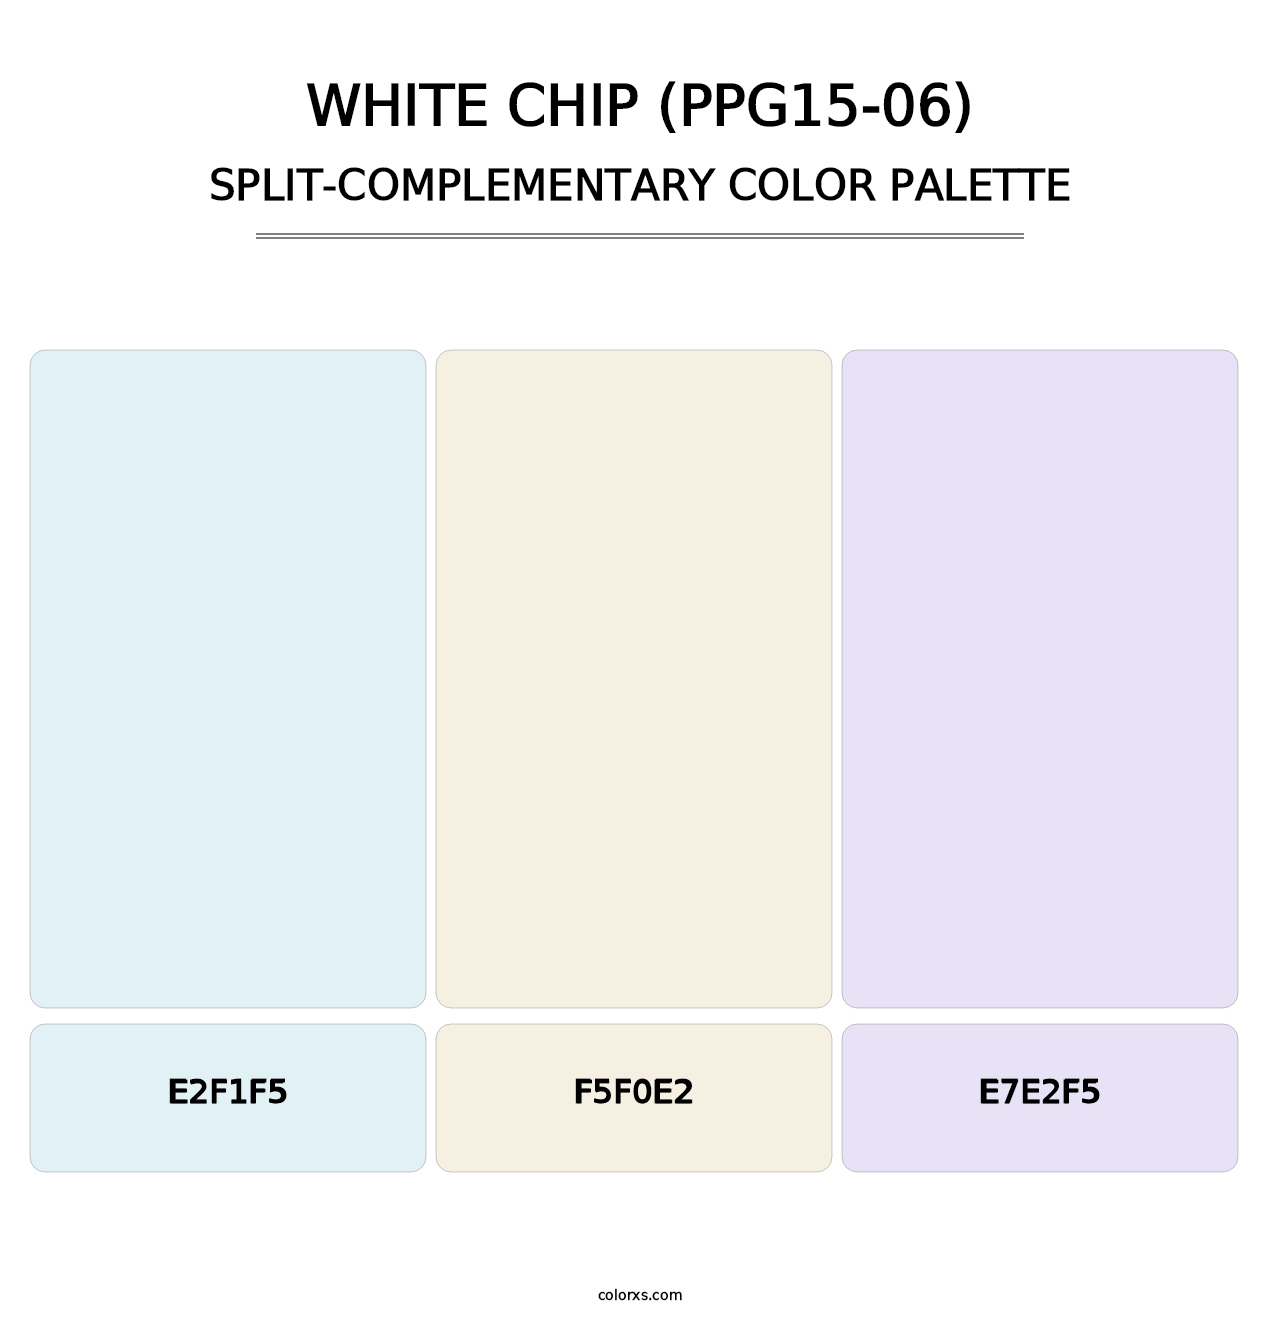 White Chip (PPG15-06) - Split-Complementary Color Palette